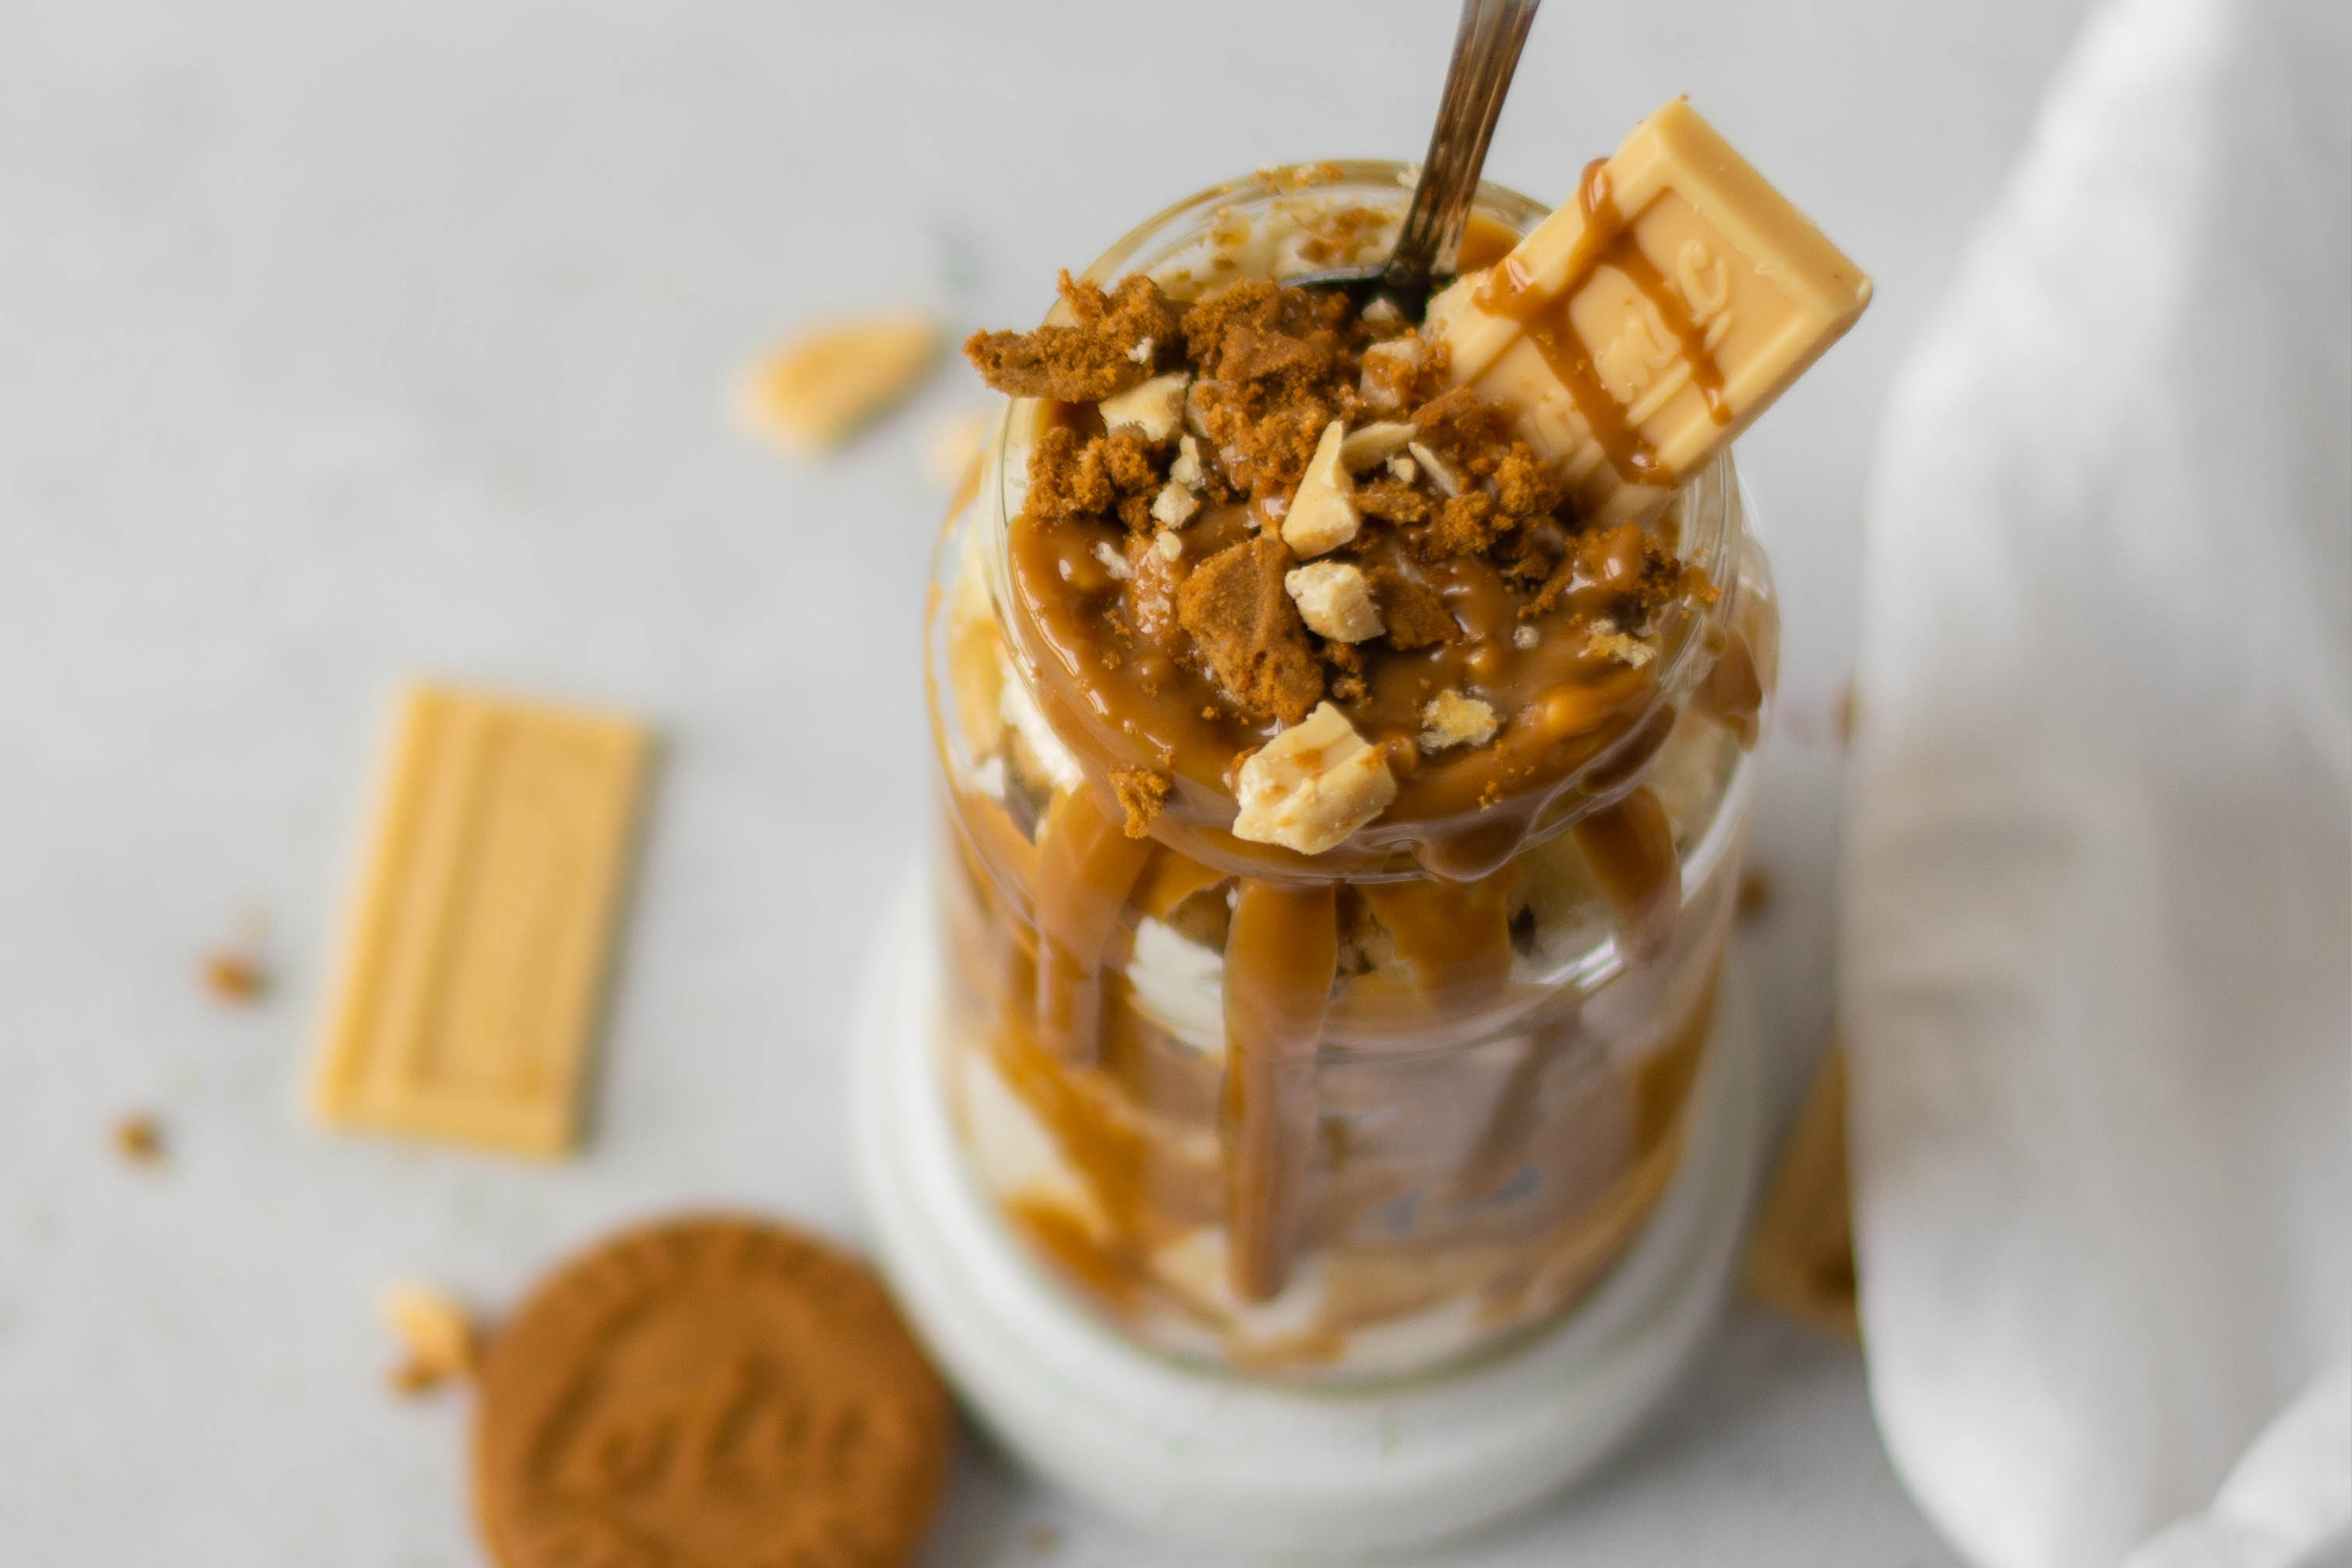 Top view of Biscoff & Caramac Cake Jar topped with drizzles of Biscoff, pieces of Caramac and a spoon inside